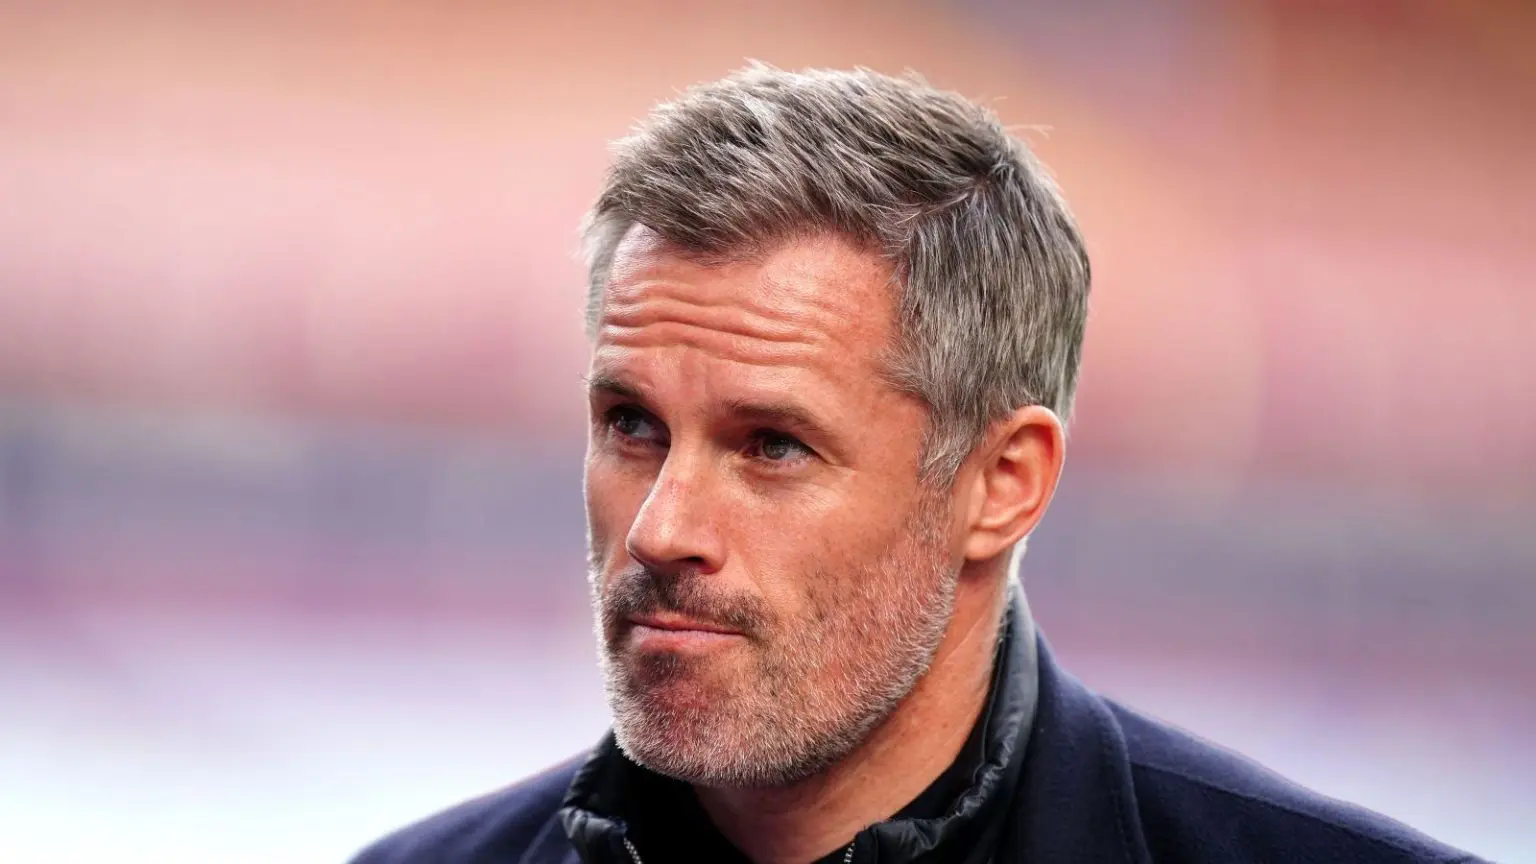 Carragher predicts where Arsenal, Liverpool will finish in EPL table this season